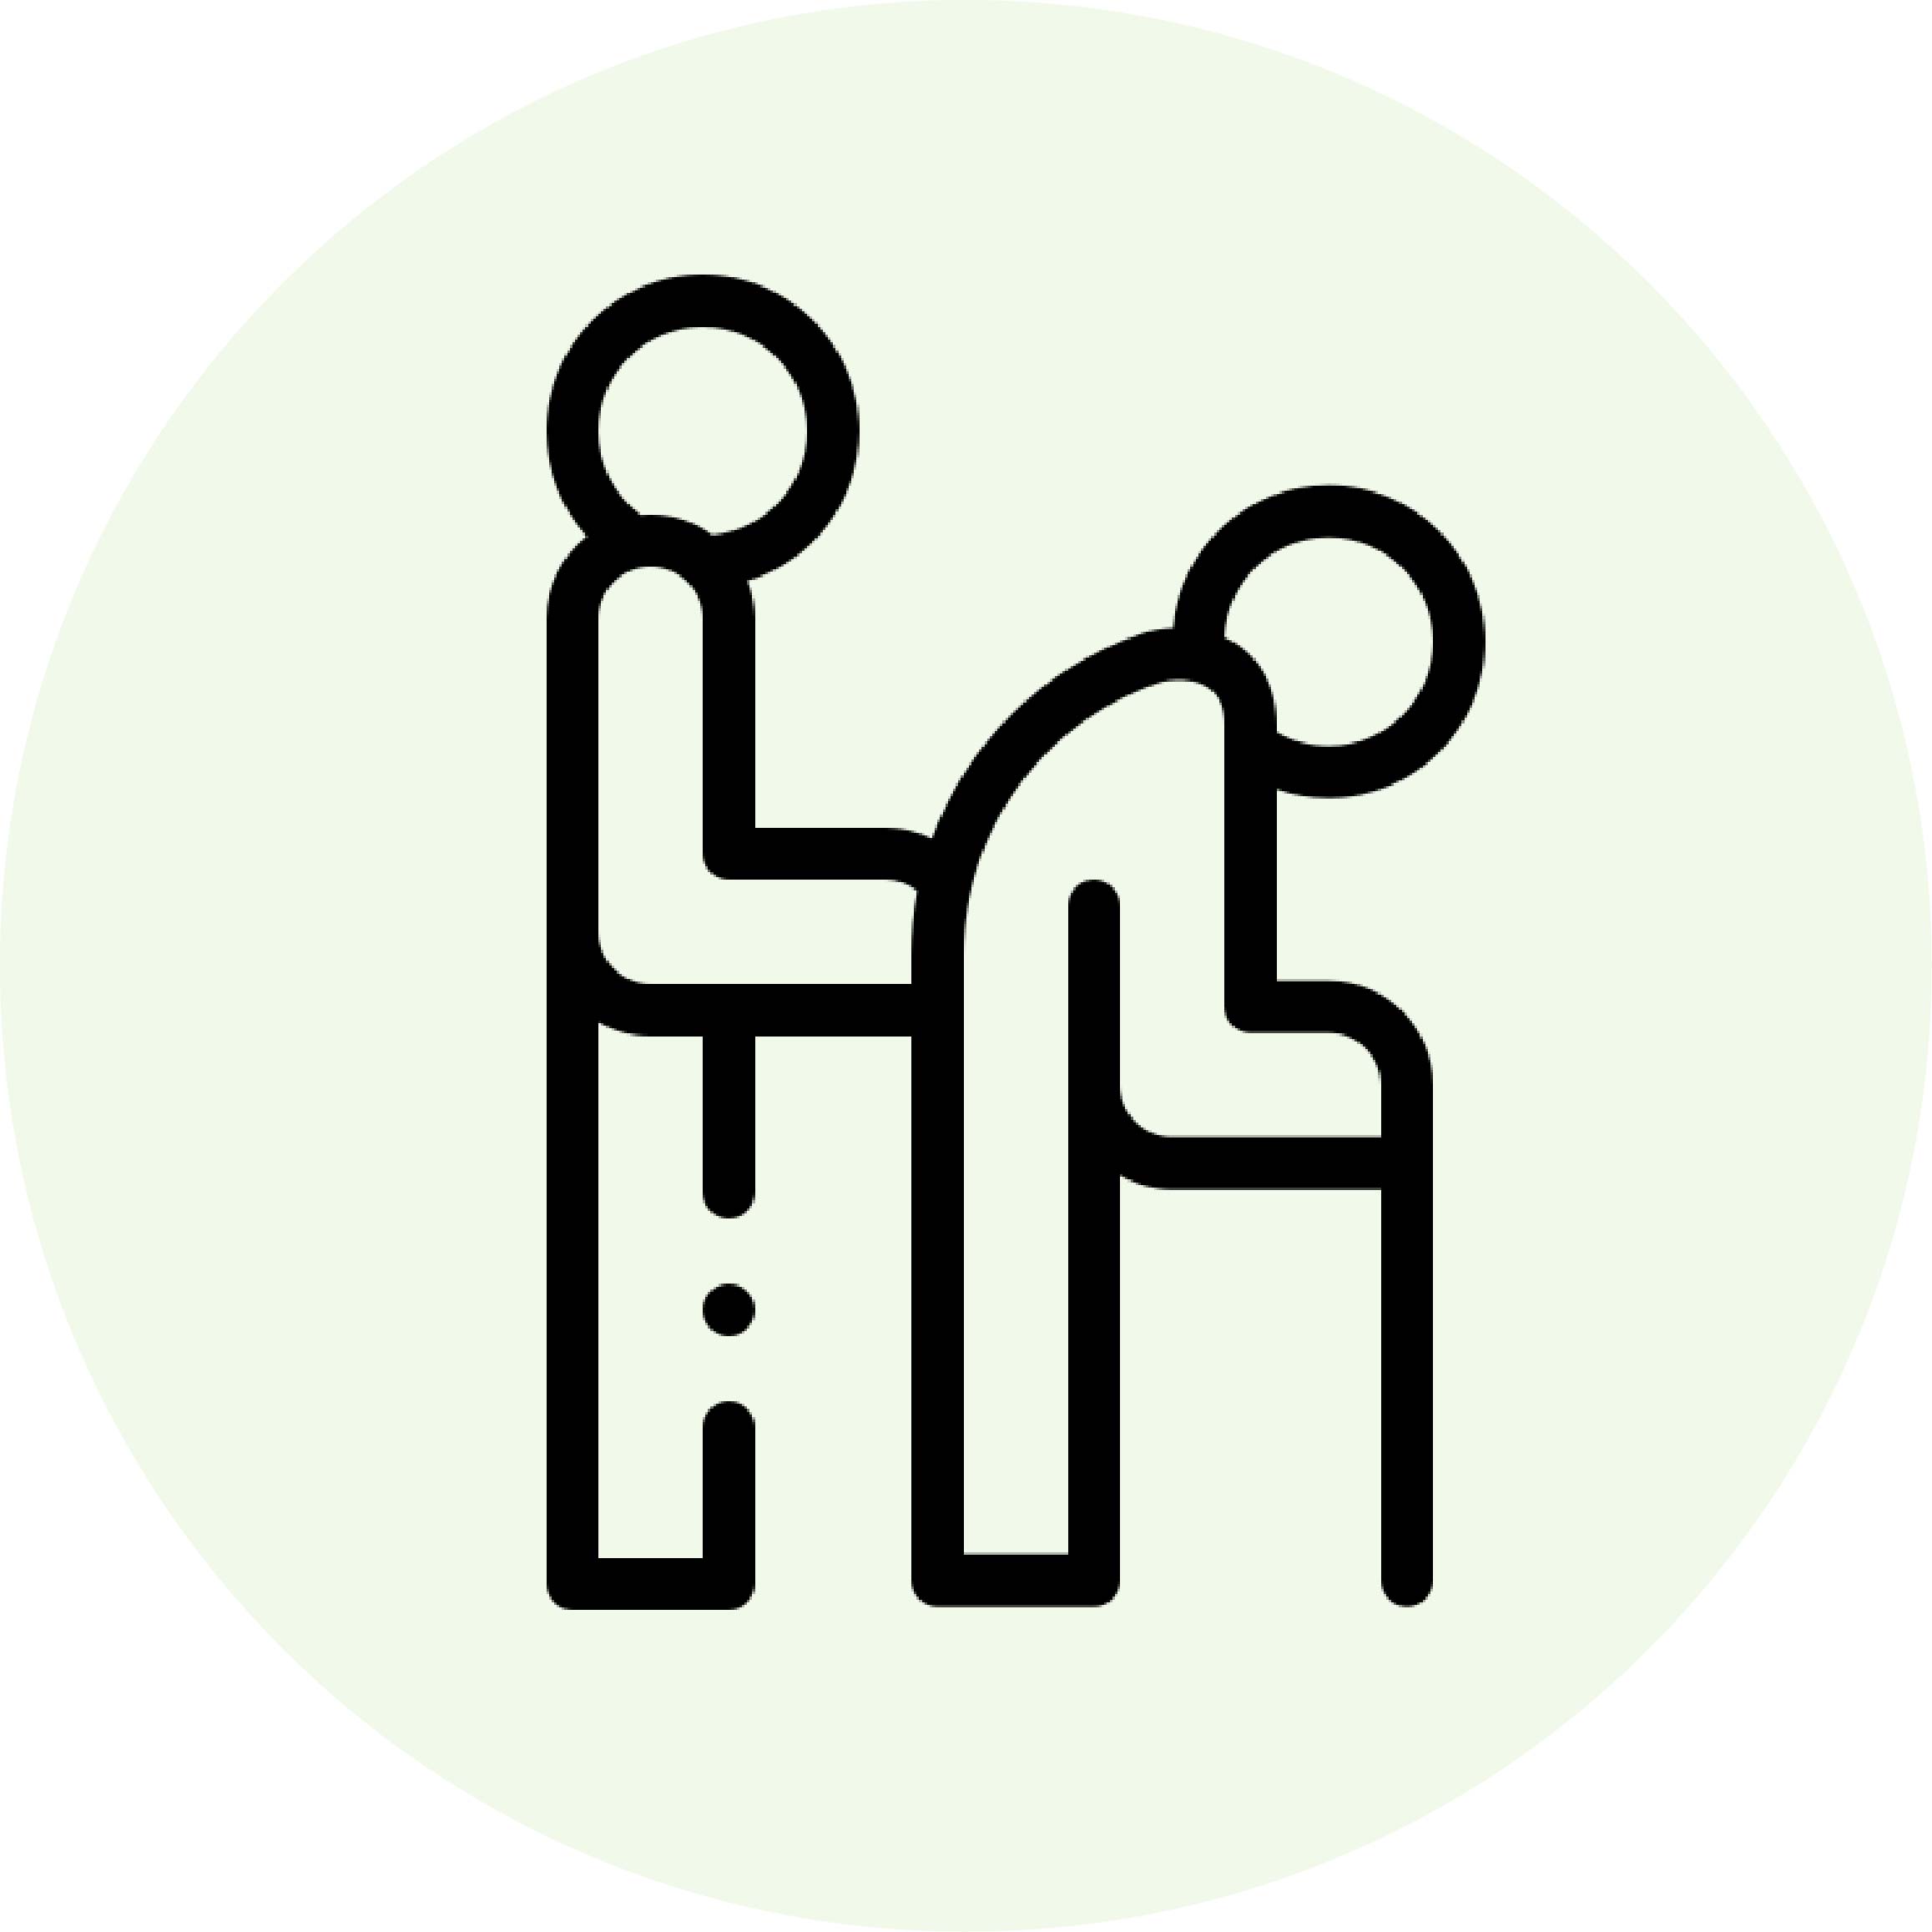 support worker assisting elderly person icon